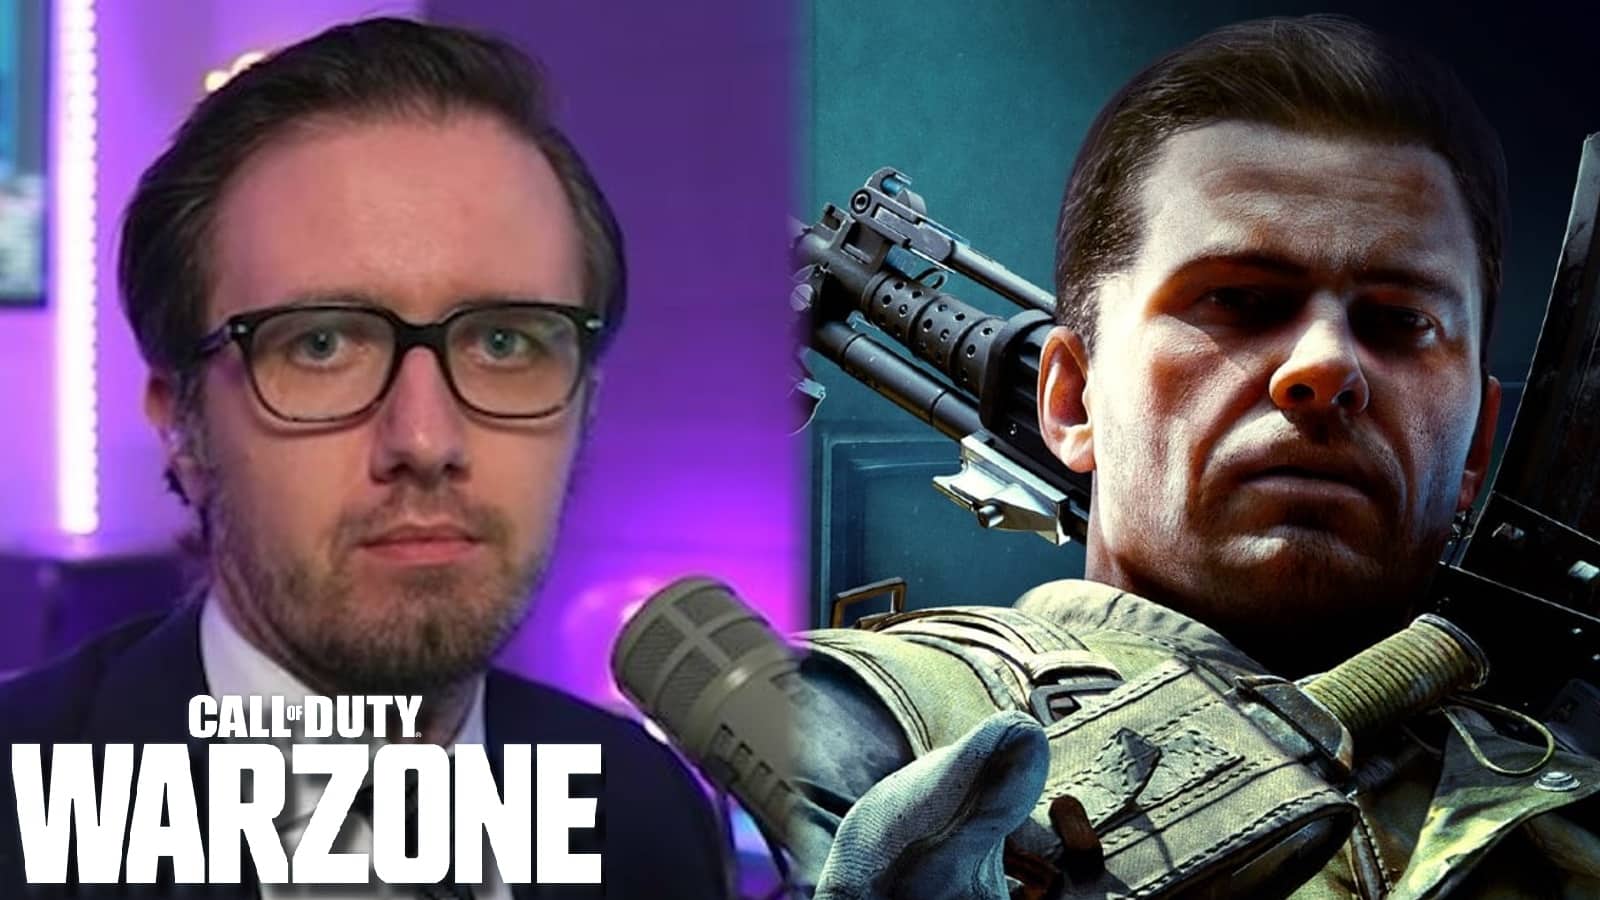 Activision faces backlash after yanking Call of Duty streamer over